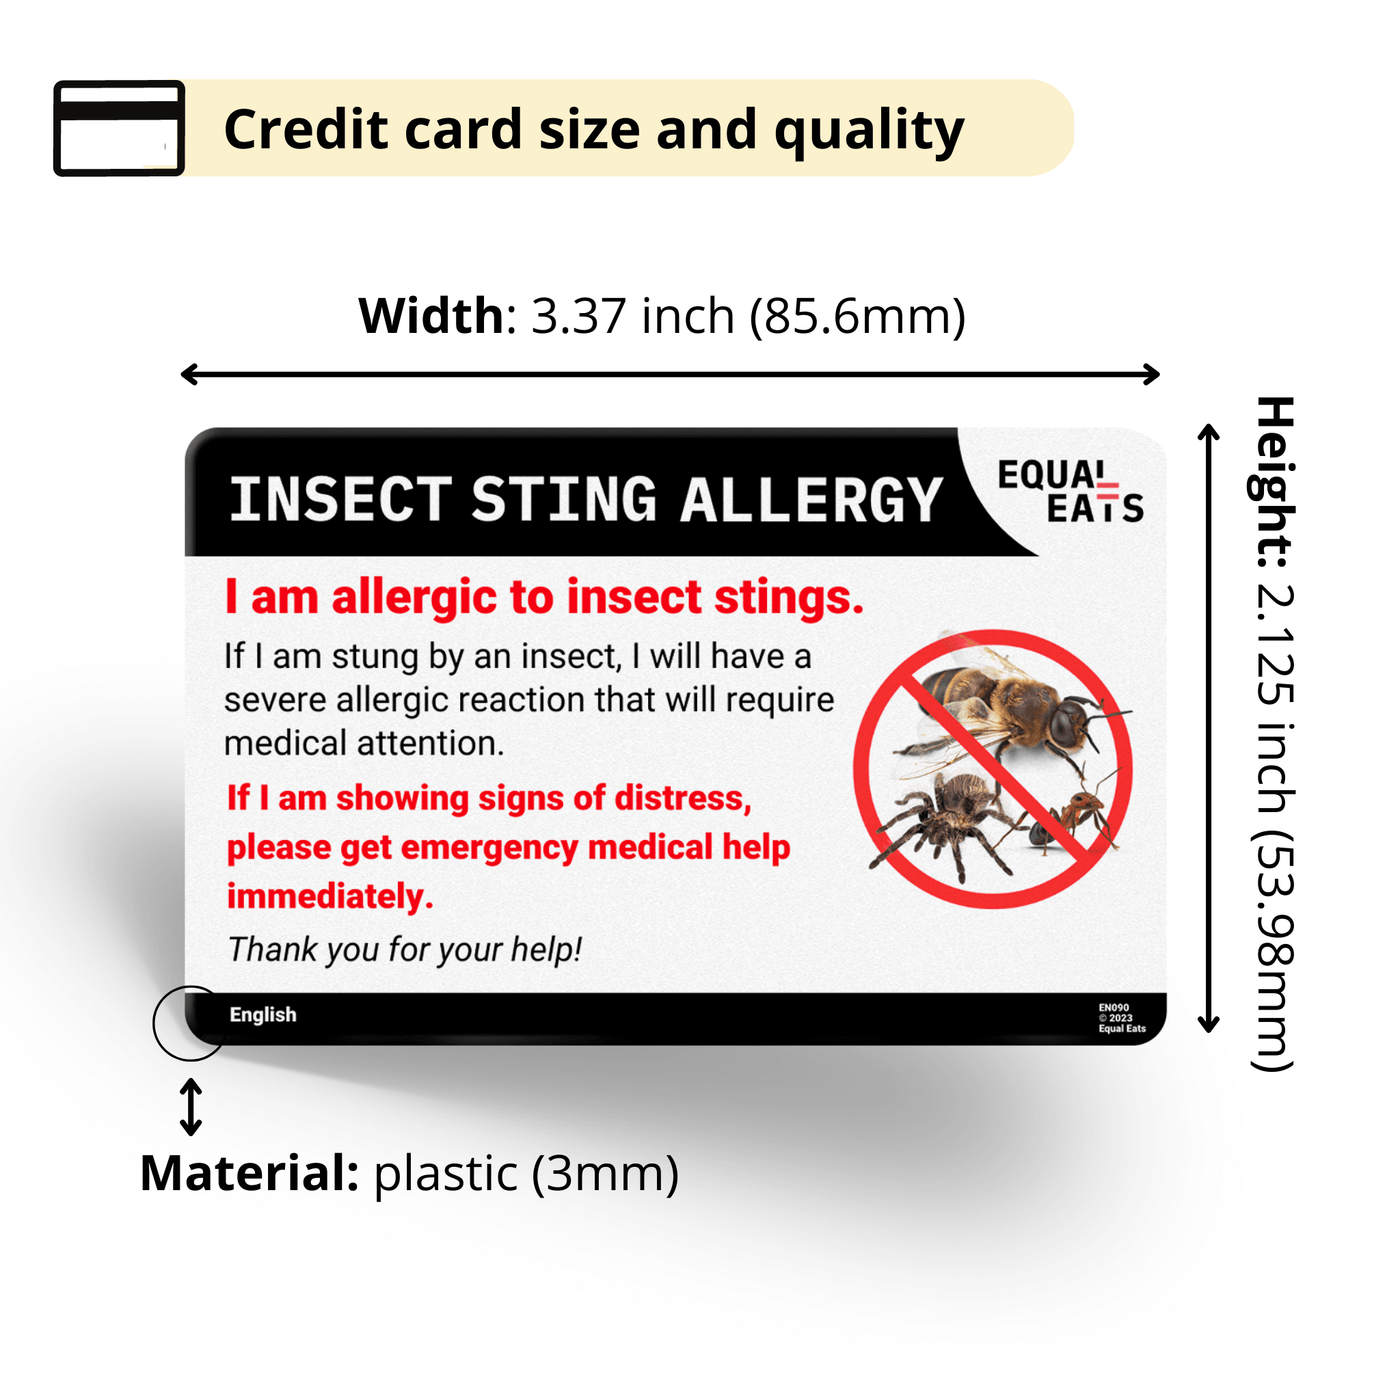 Portuguese (Portugal) Insect Sting Allergy Card